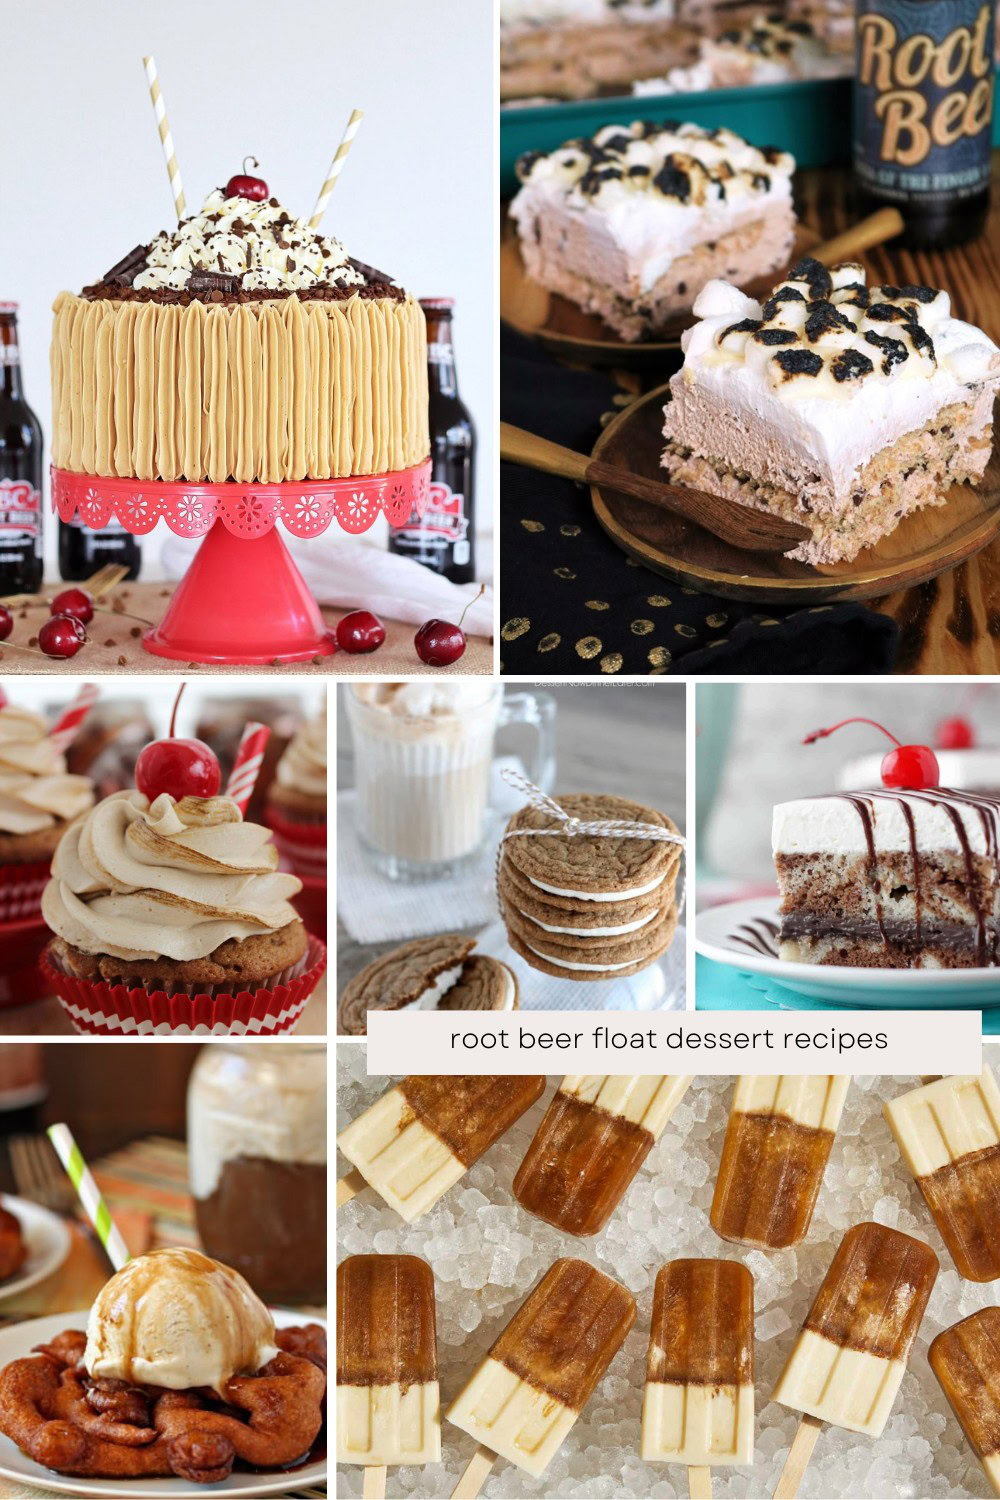 Can't get enough of root beer floats? Check out these 10 irresistible root beer float desserts! 🍨😍 From Root Beer Float Cake to No-Bake Root Beer Float Cheesecake Bars, there's a treat for every root beer lover. Save this post for your next dessert craving! #RootBeerFloat #DessertRecipes #SweetTooth








